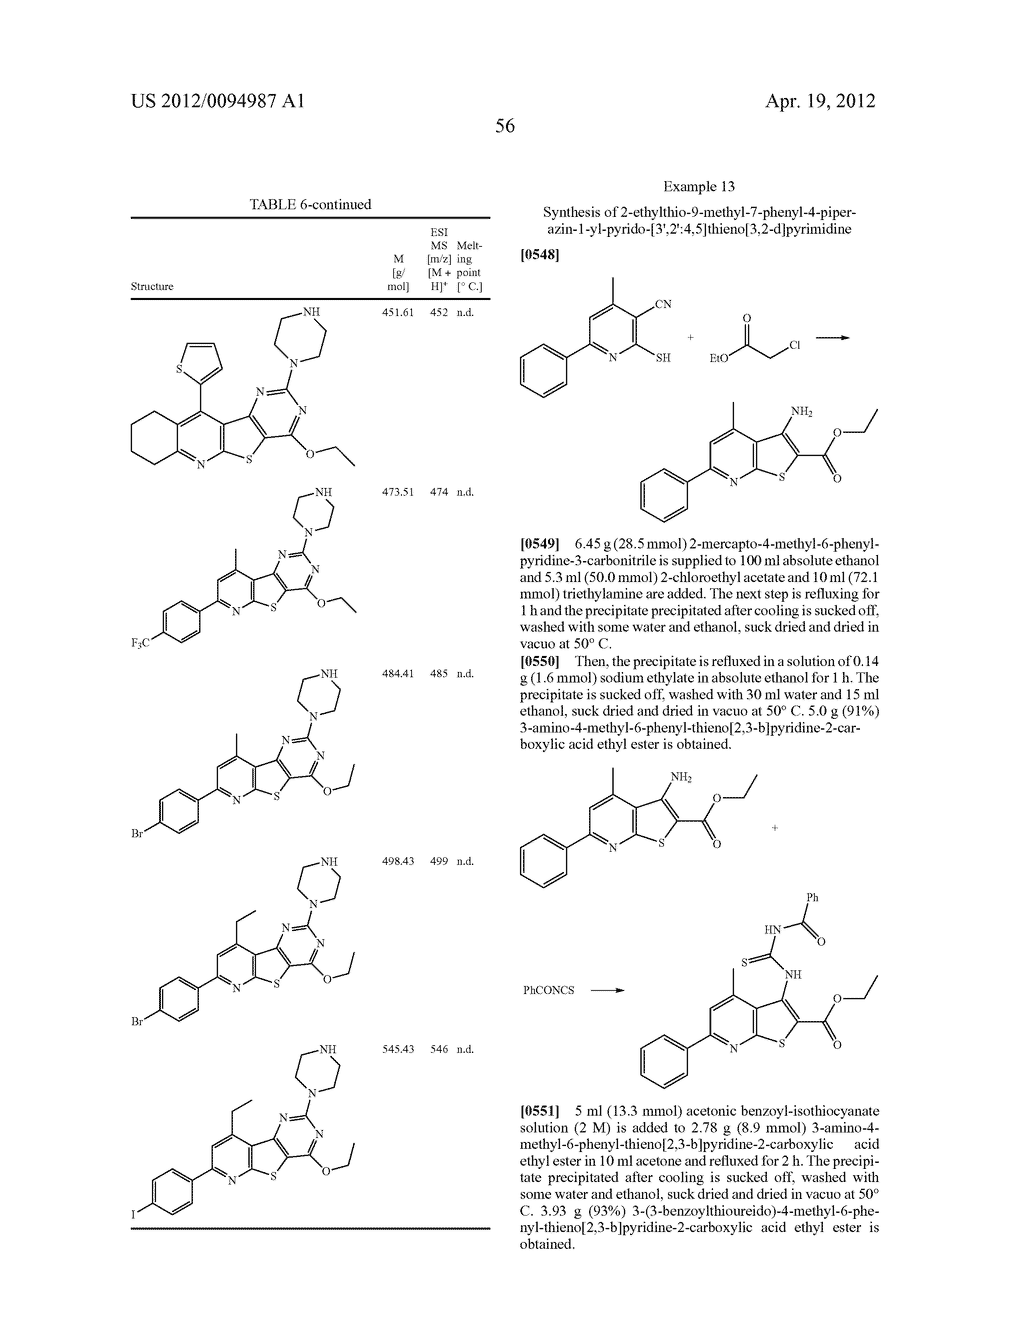 SUBSTITUTED PYRIDO [3', 2': 4, 5] THIENO [3, 2-D] PYRIMIDINES AND PYRIDO     [3', 2': 4, 5] FURO [3, 2-D] PYRIMIDINES USED AS INHIBITORS OF THE PDE-4     AND/OR THE RELEASE OF TNF-alpha - diagram, schematic, and image 58